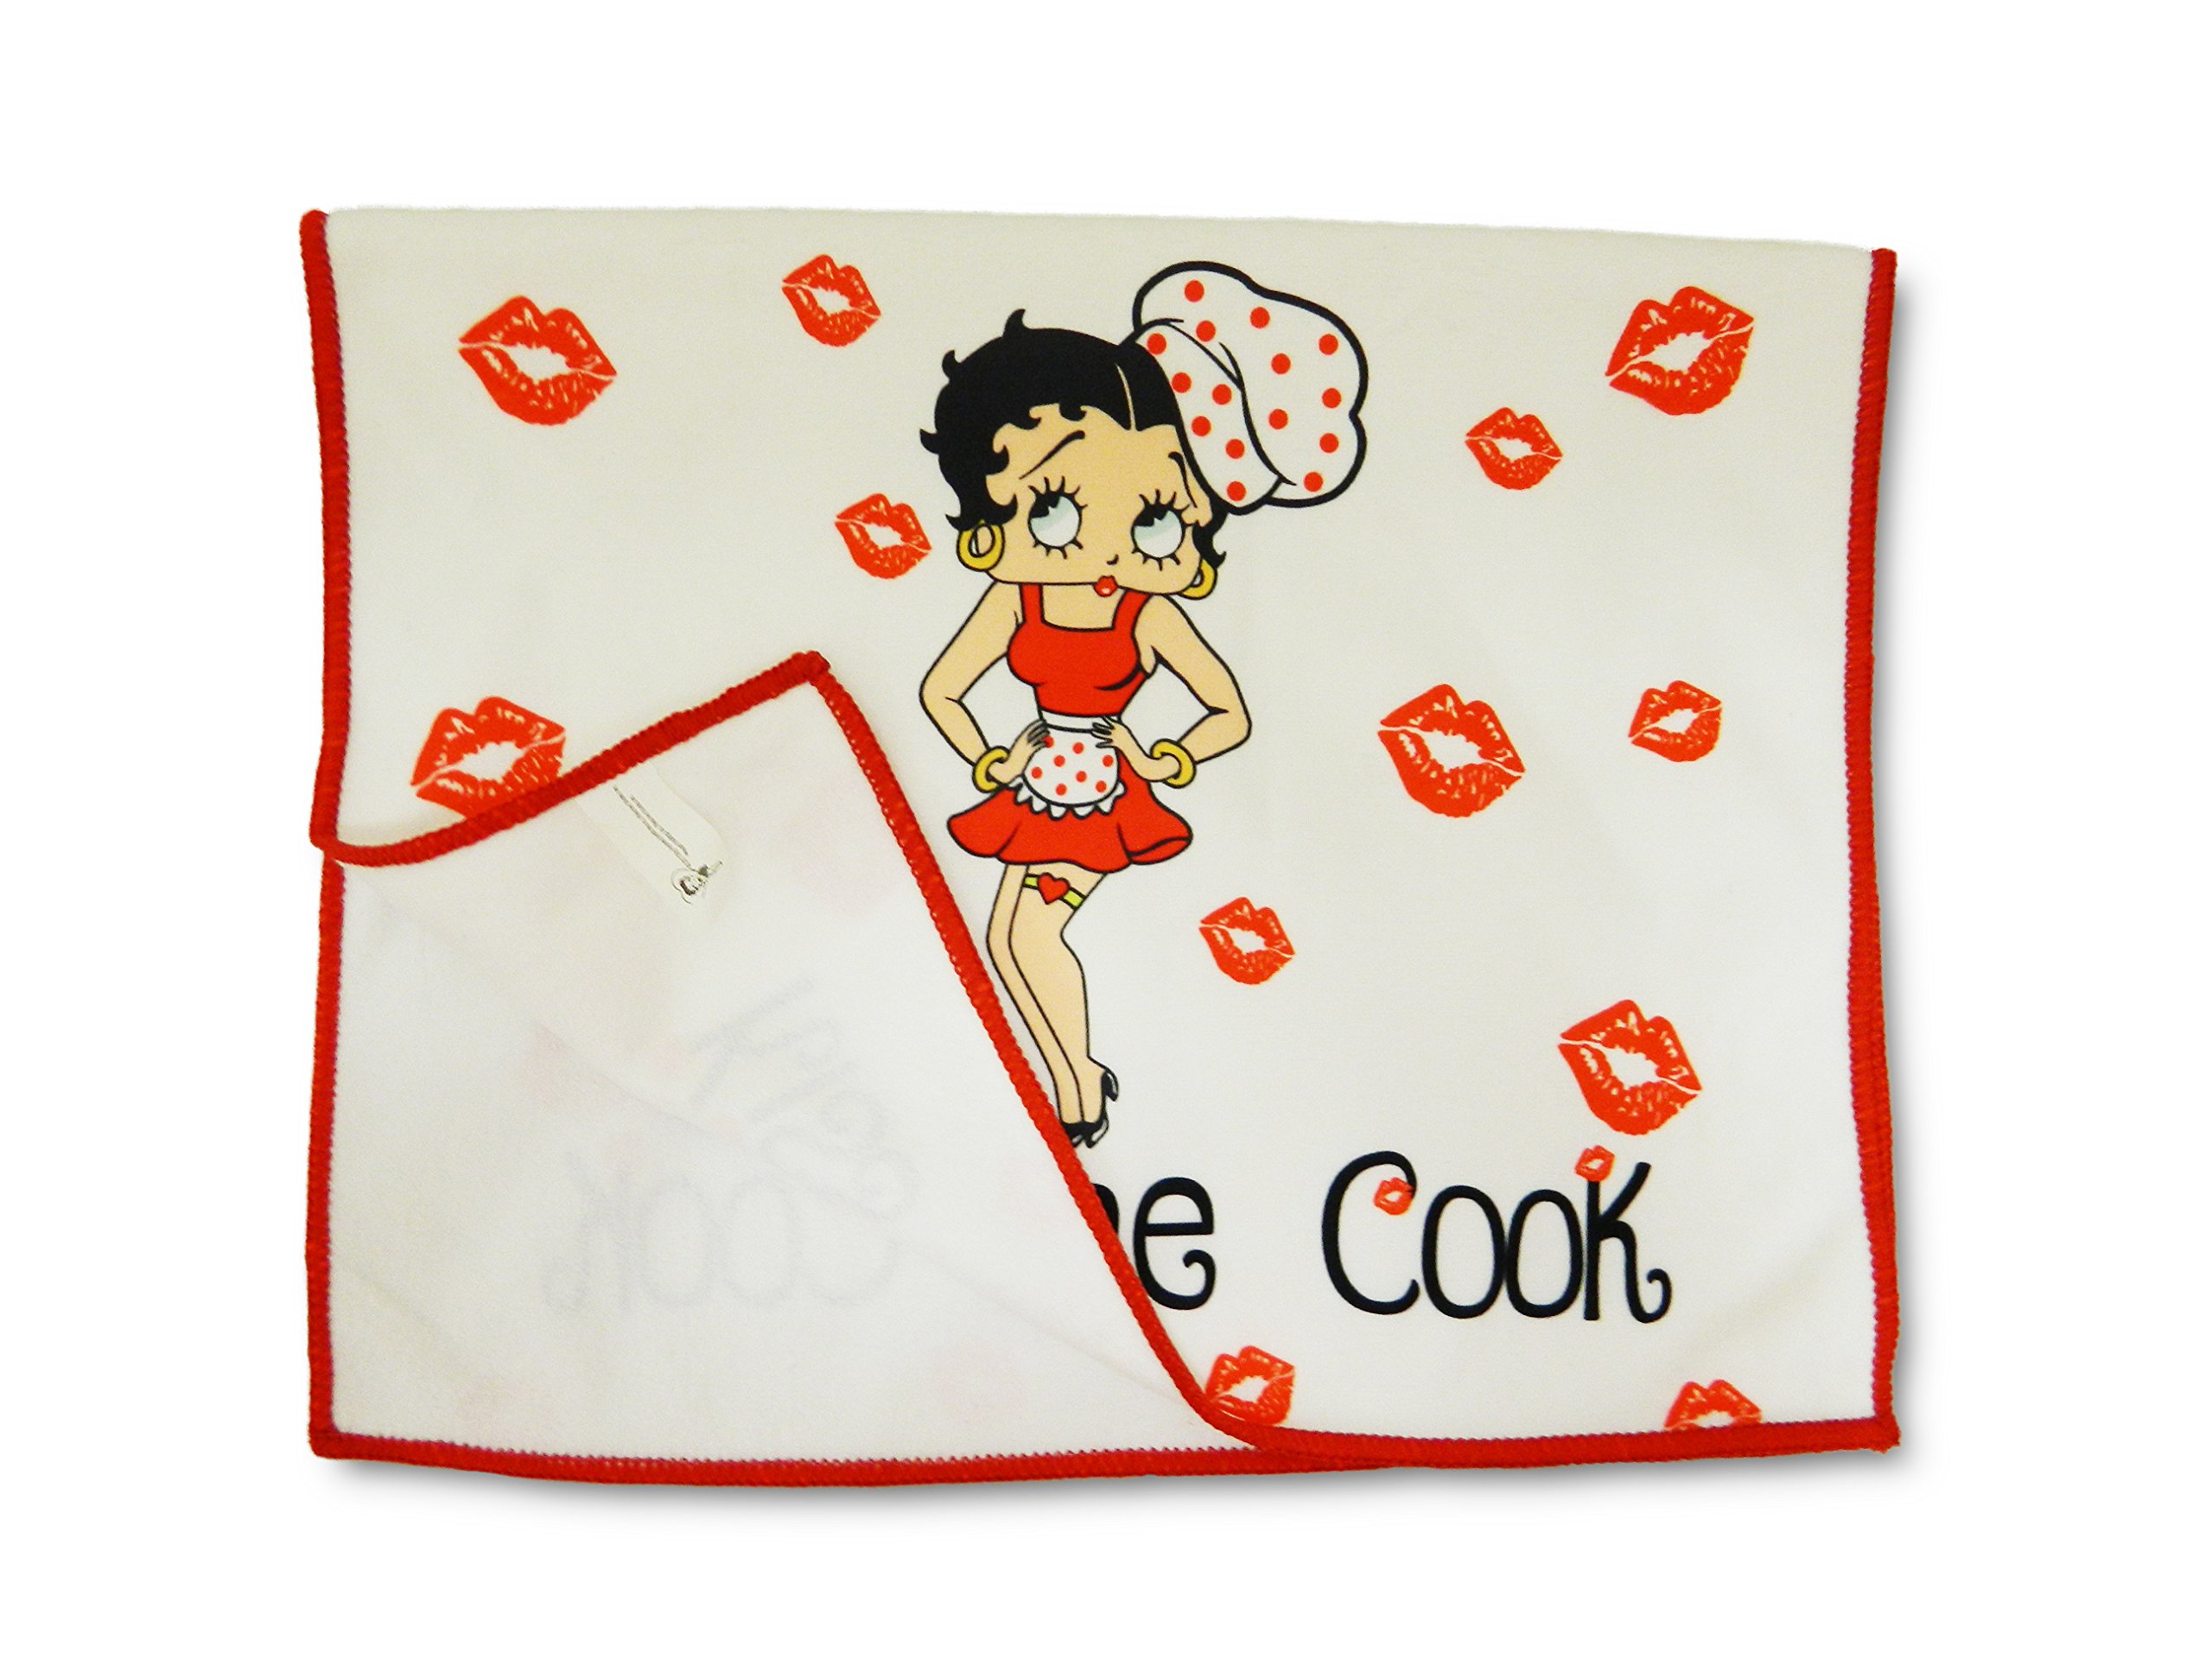 Midsouth Products Betty Boop Kitchen Towel - Kiss The Cook